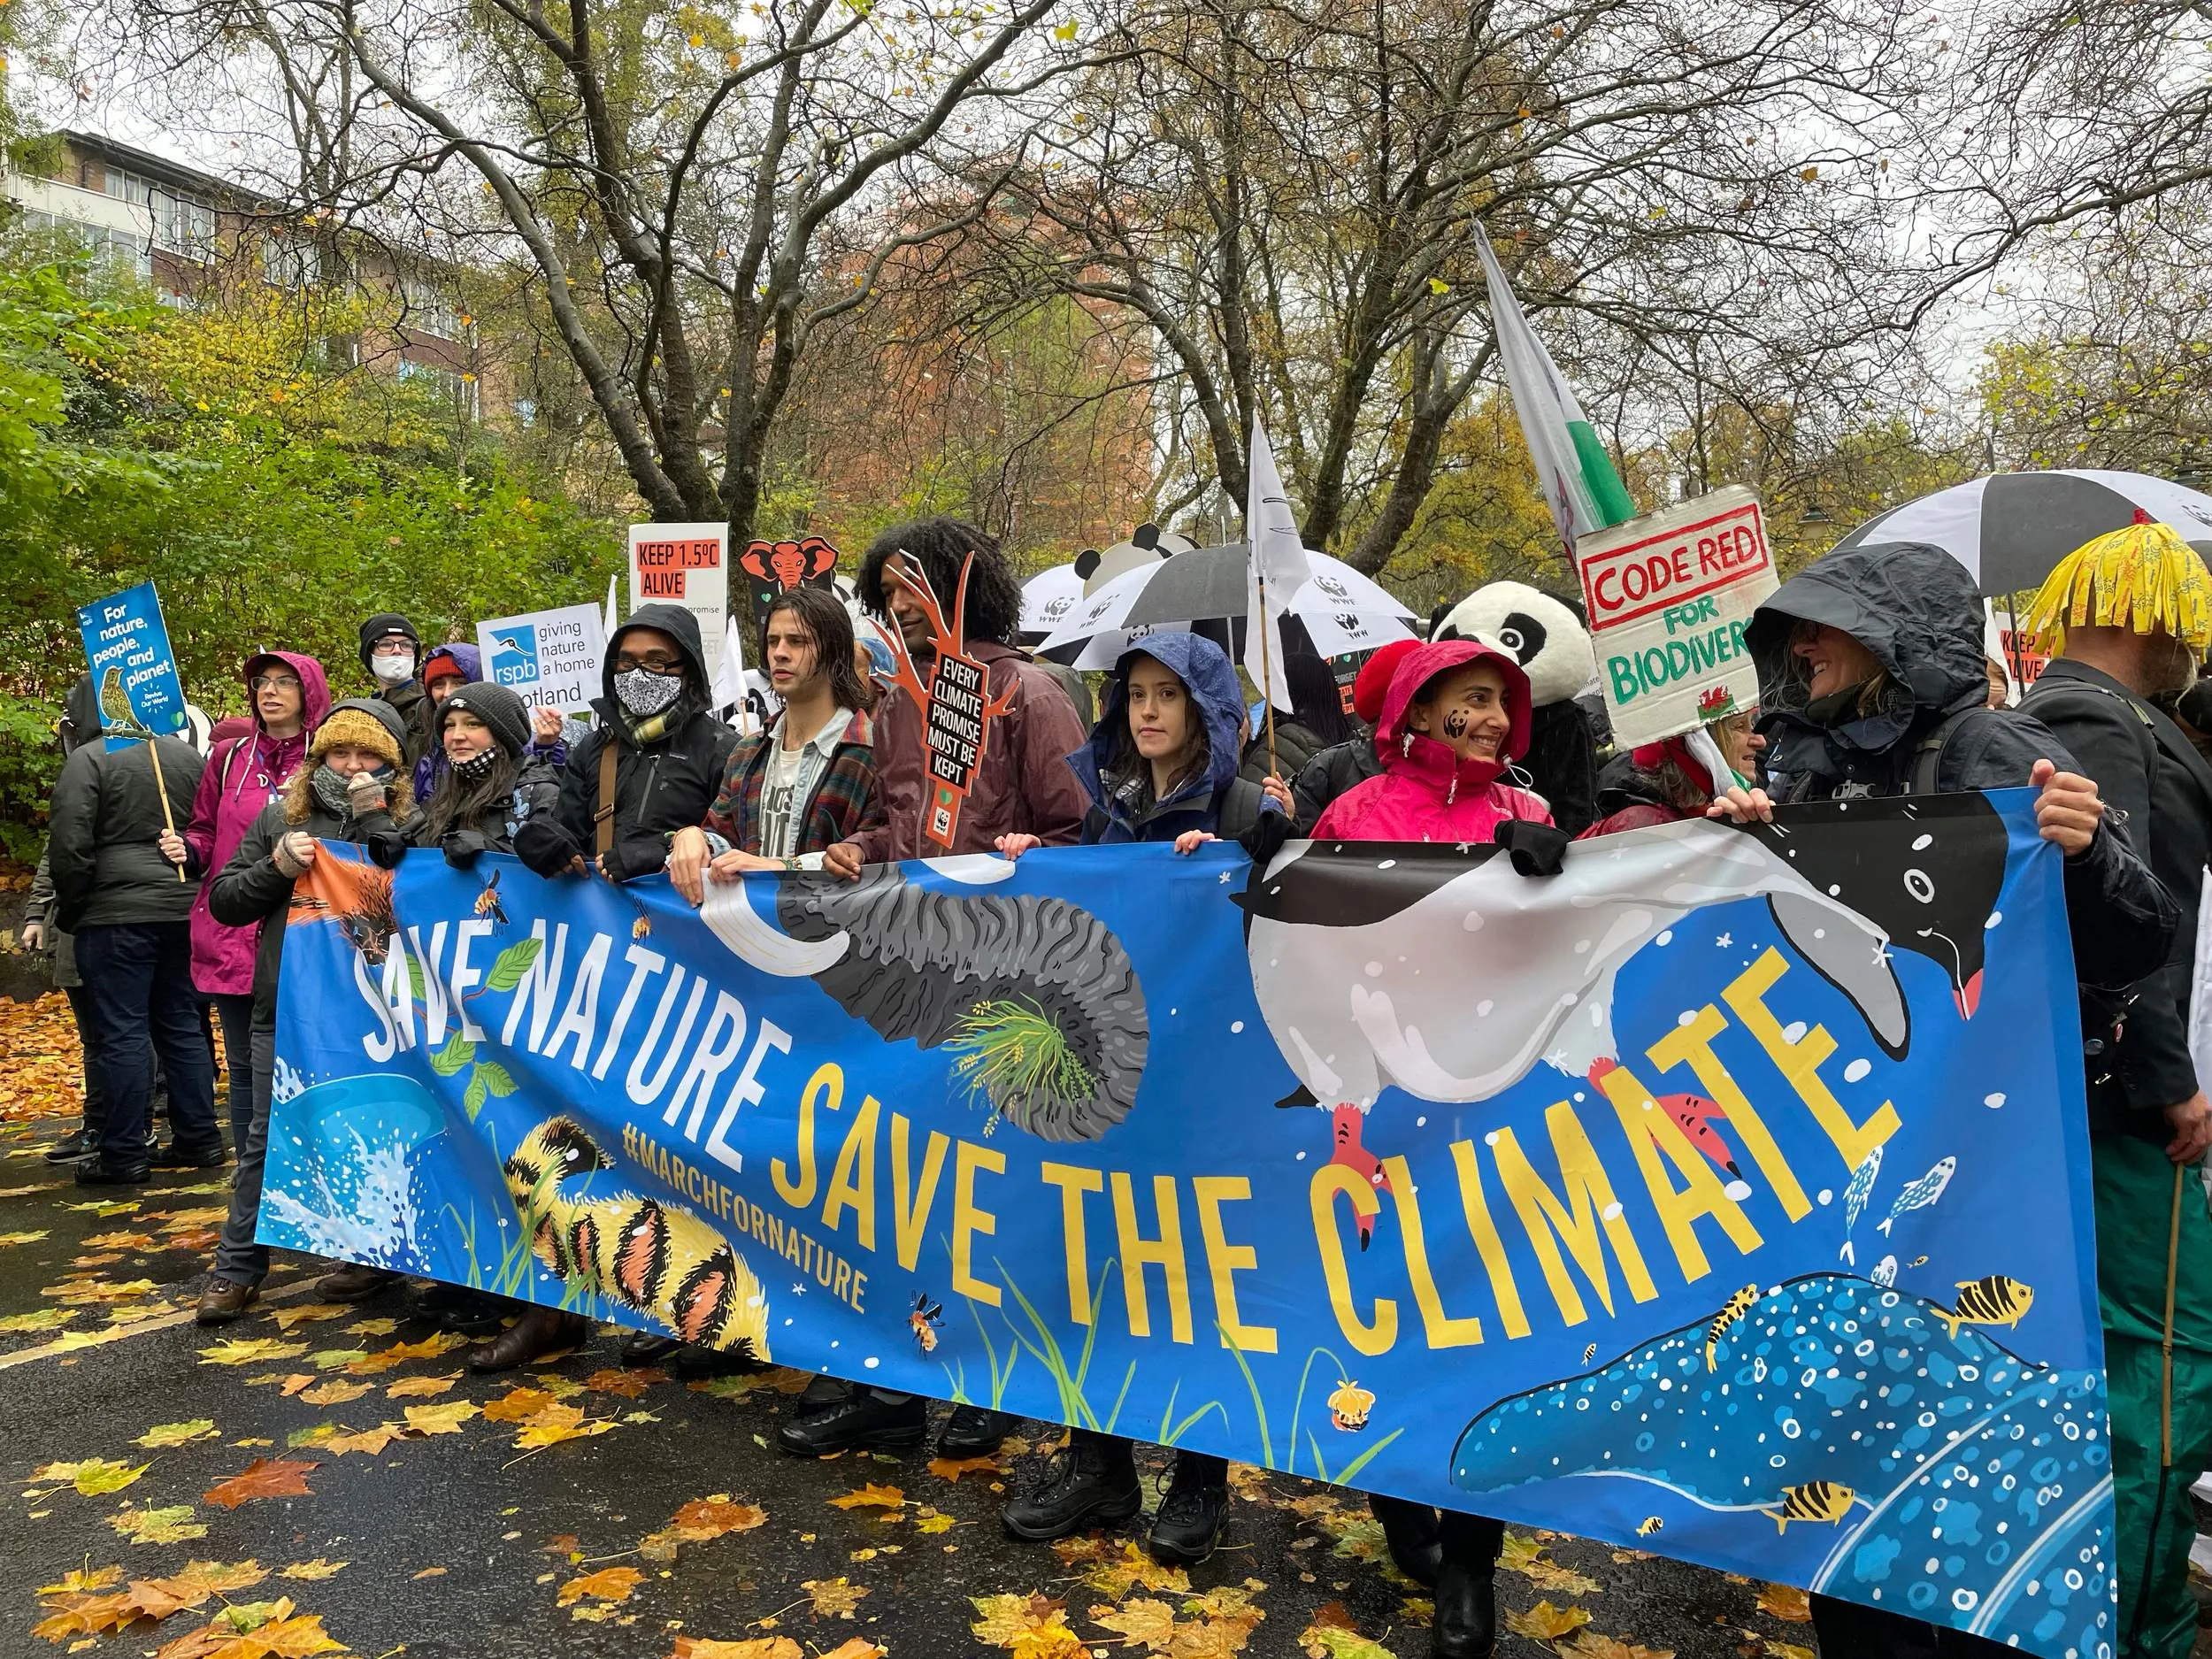 A group of protesters marching with a large banner which reads, "Save Nature, Save The Climate".